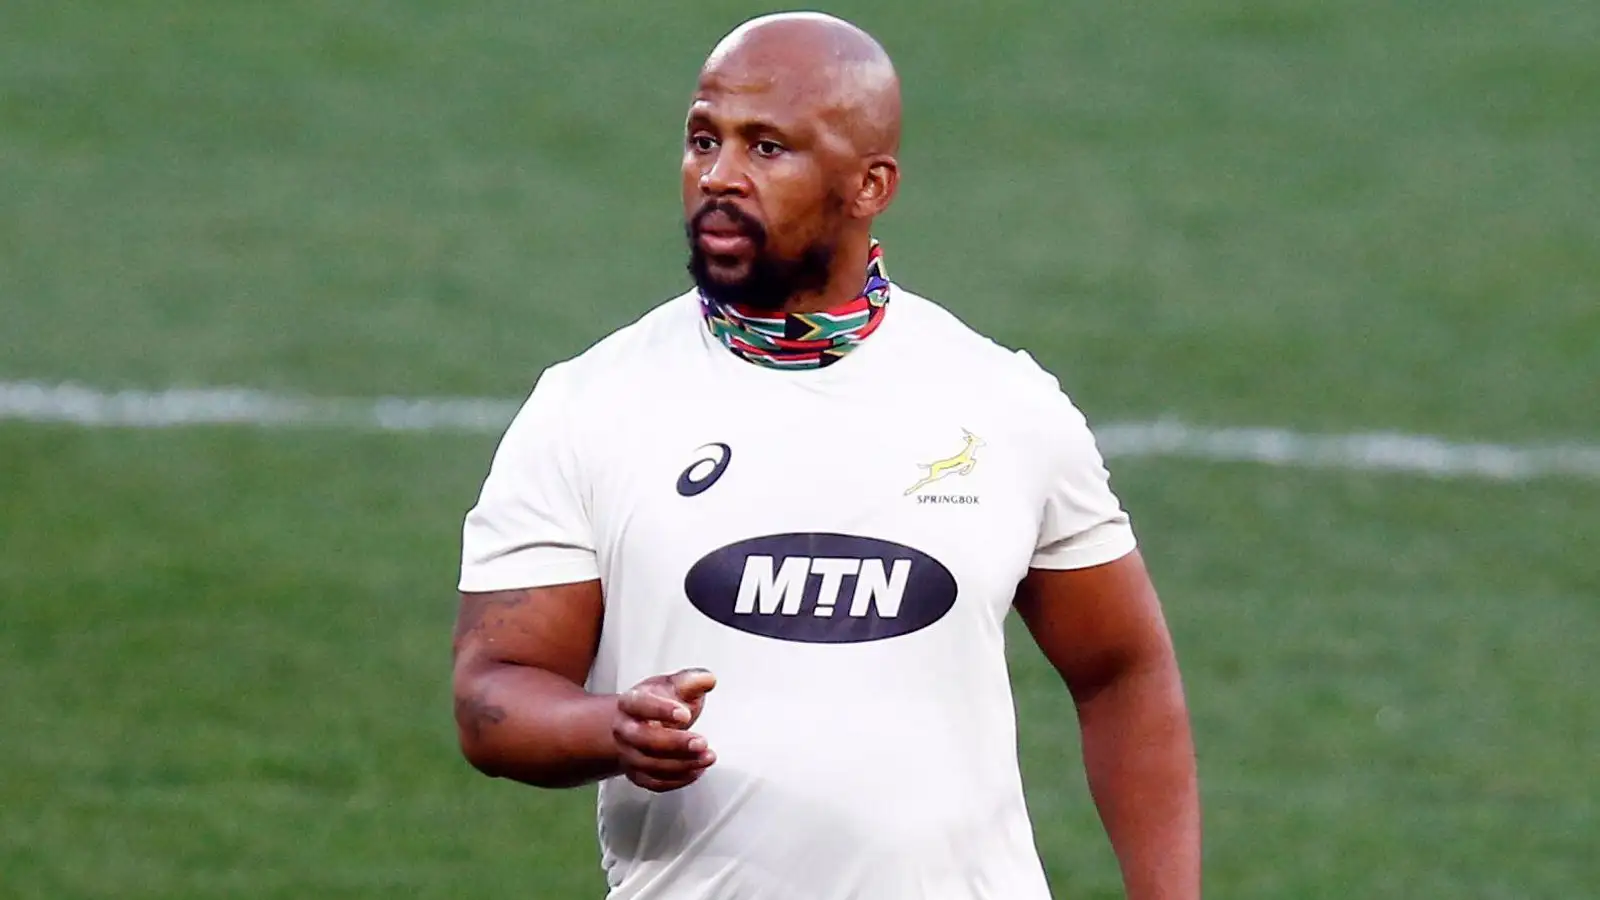 South Africa's Coach Explains Why they Want the Game Against Ireland to Be Challenging